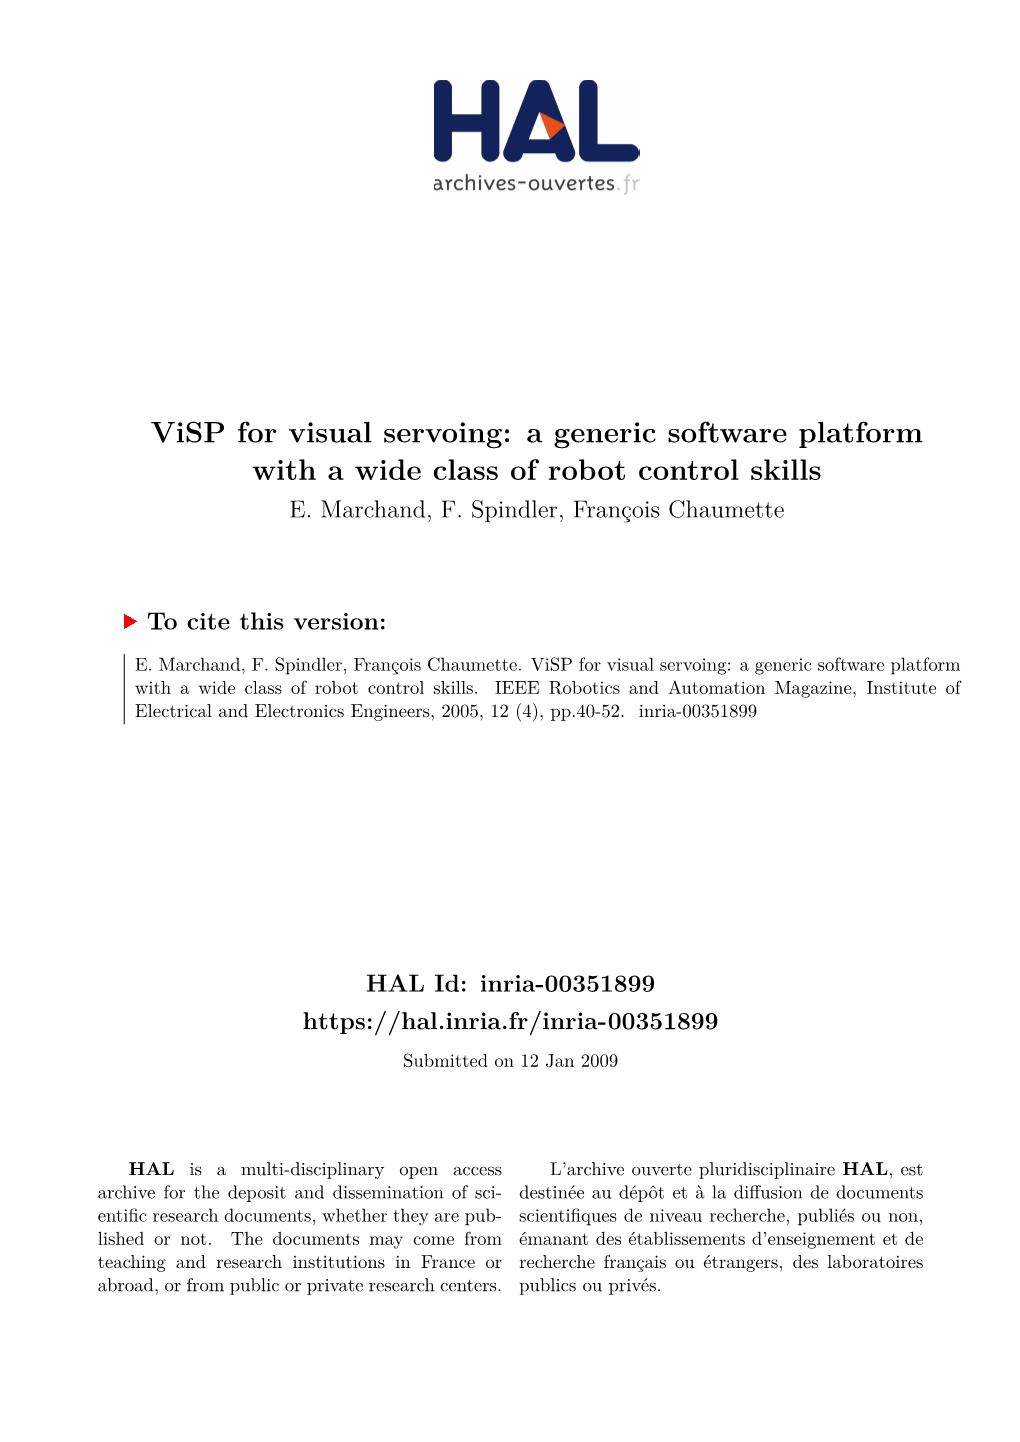 Visp for Visual Servoing: a Generic Software Platform with a Wide Class of Robot Control Skills E